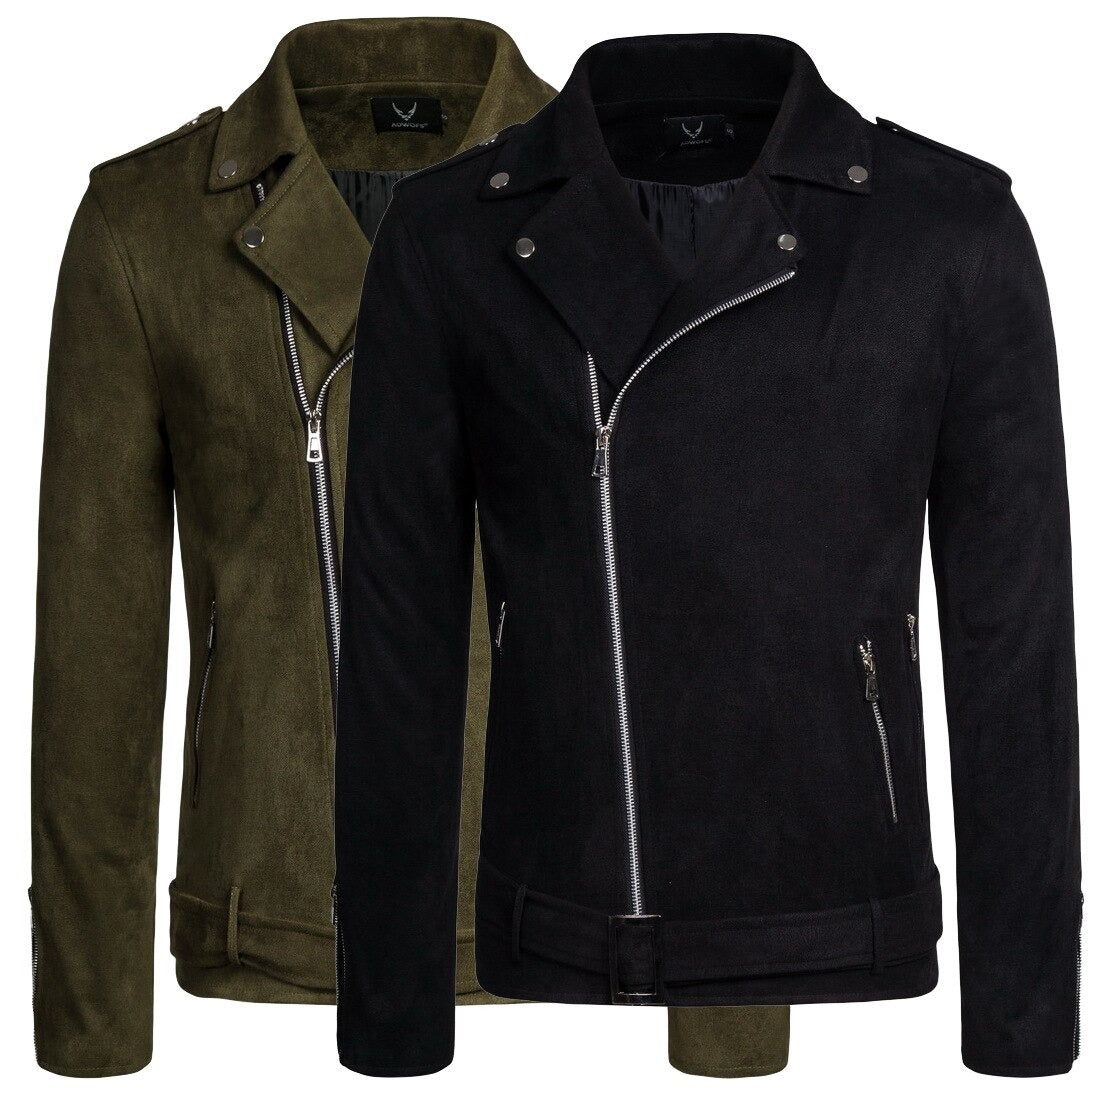 Black and Green Motorcycle Suede Zipper Jacket for Men / Male Jacket and Coat of Slim Outwear - HARD'N'HEAVY